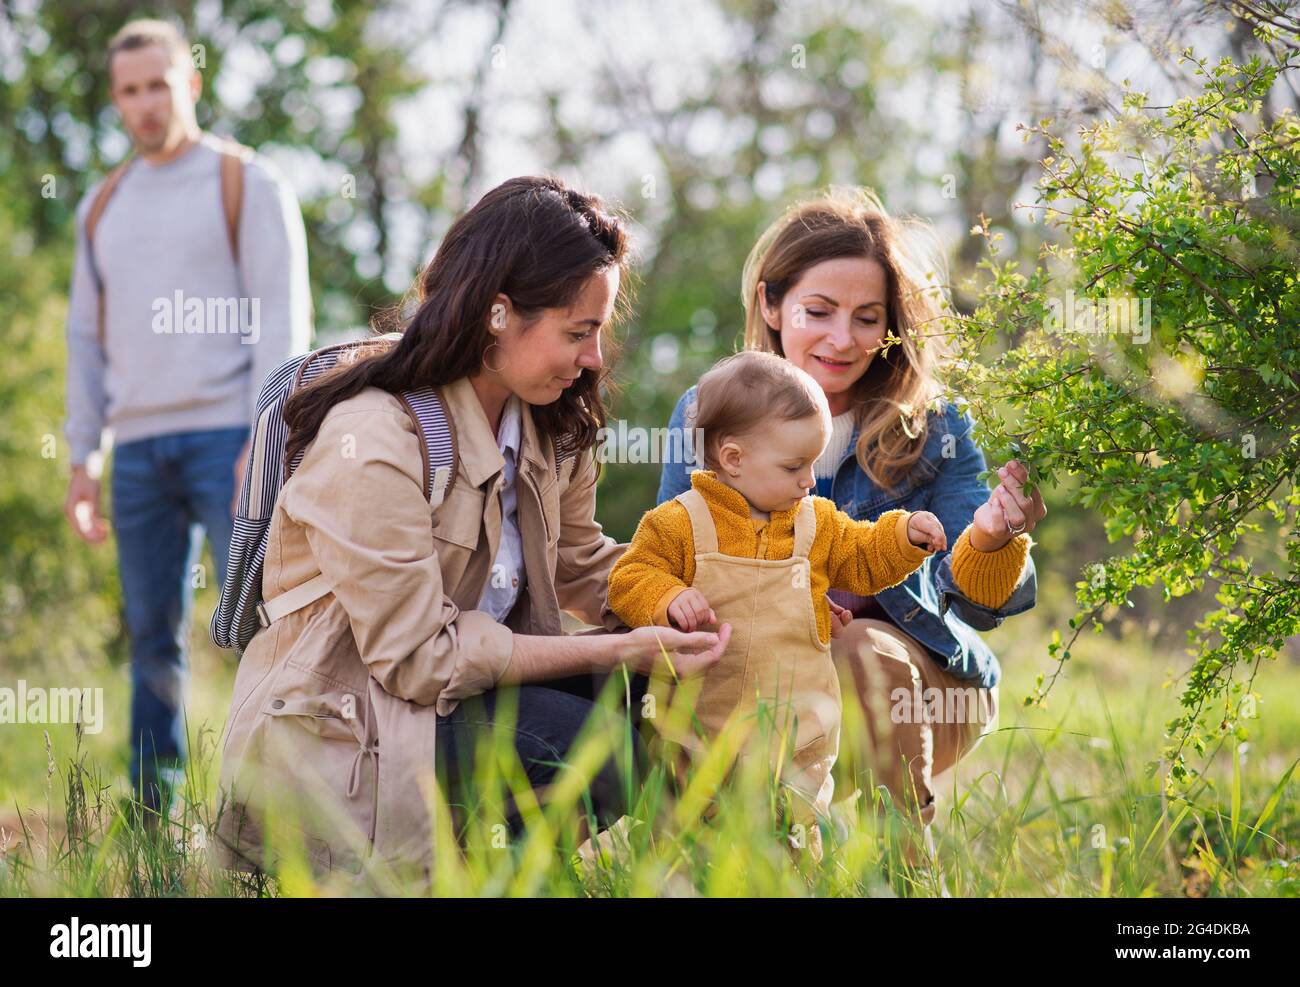 Small toddler with parents and grandparents on a walk outdoors in nature. Stock Photo